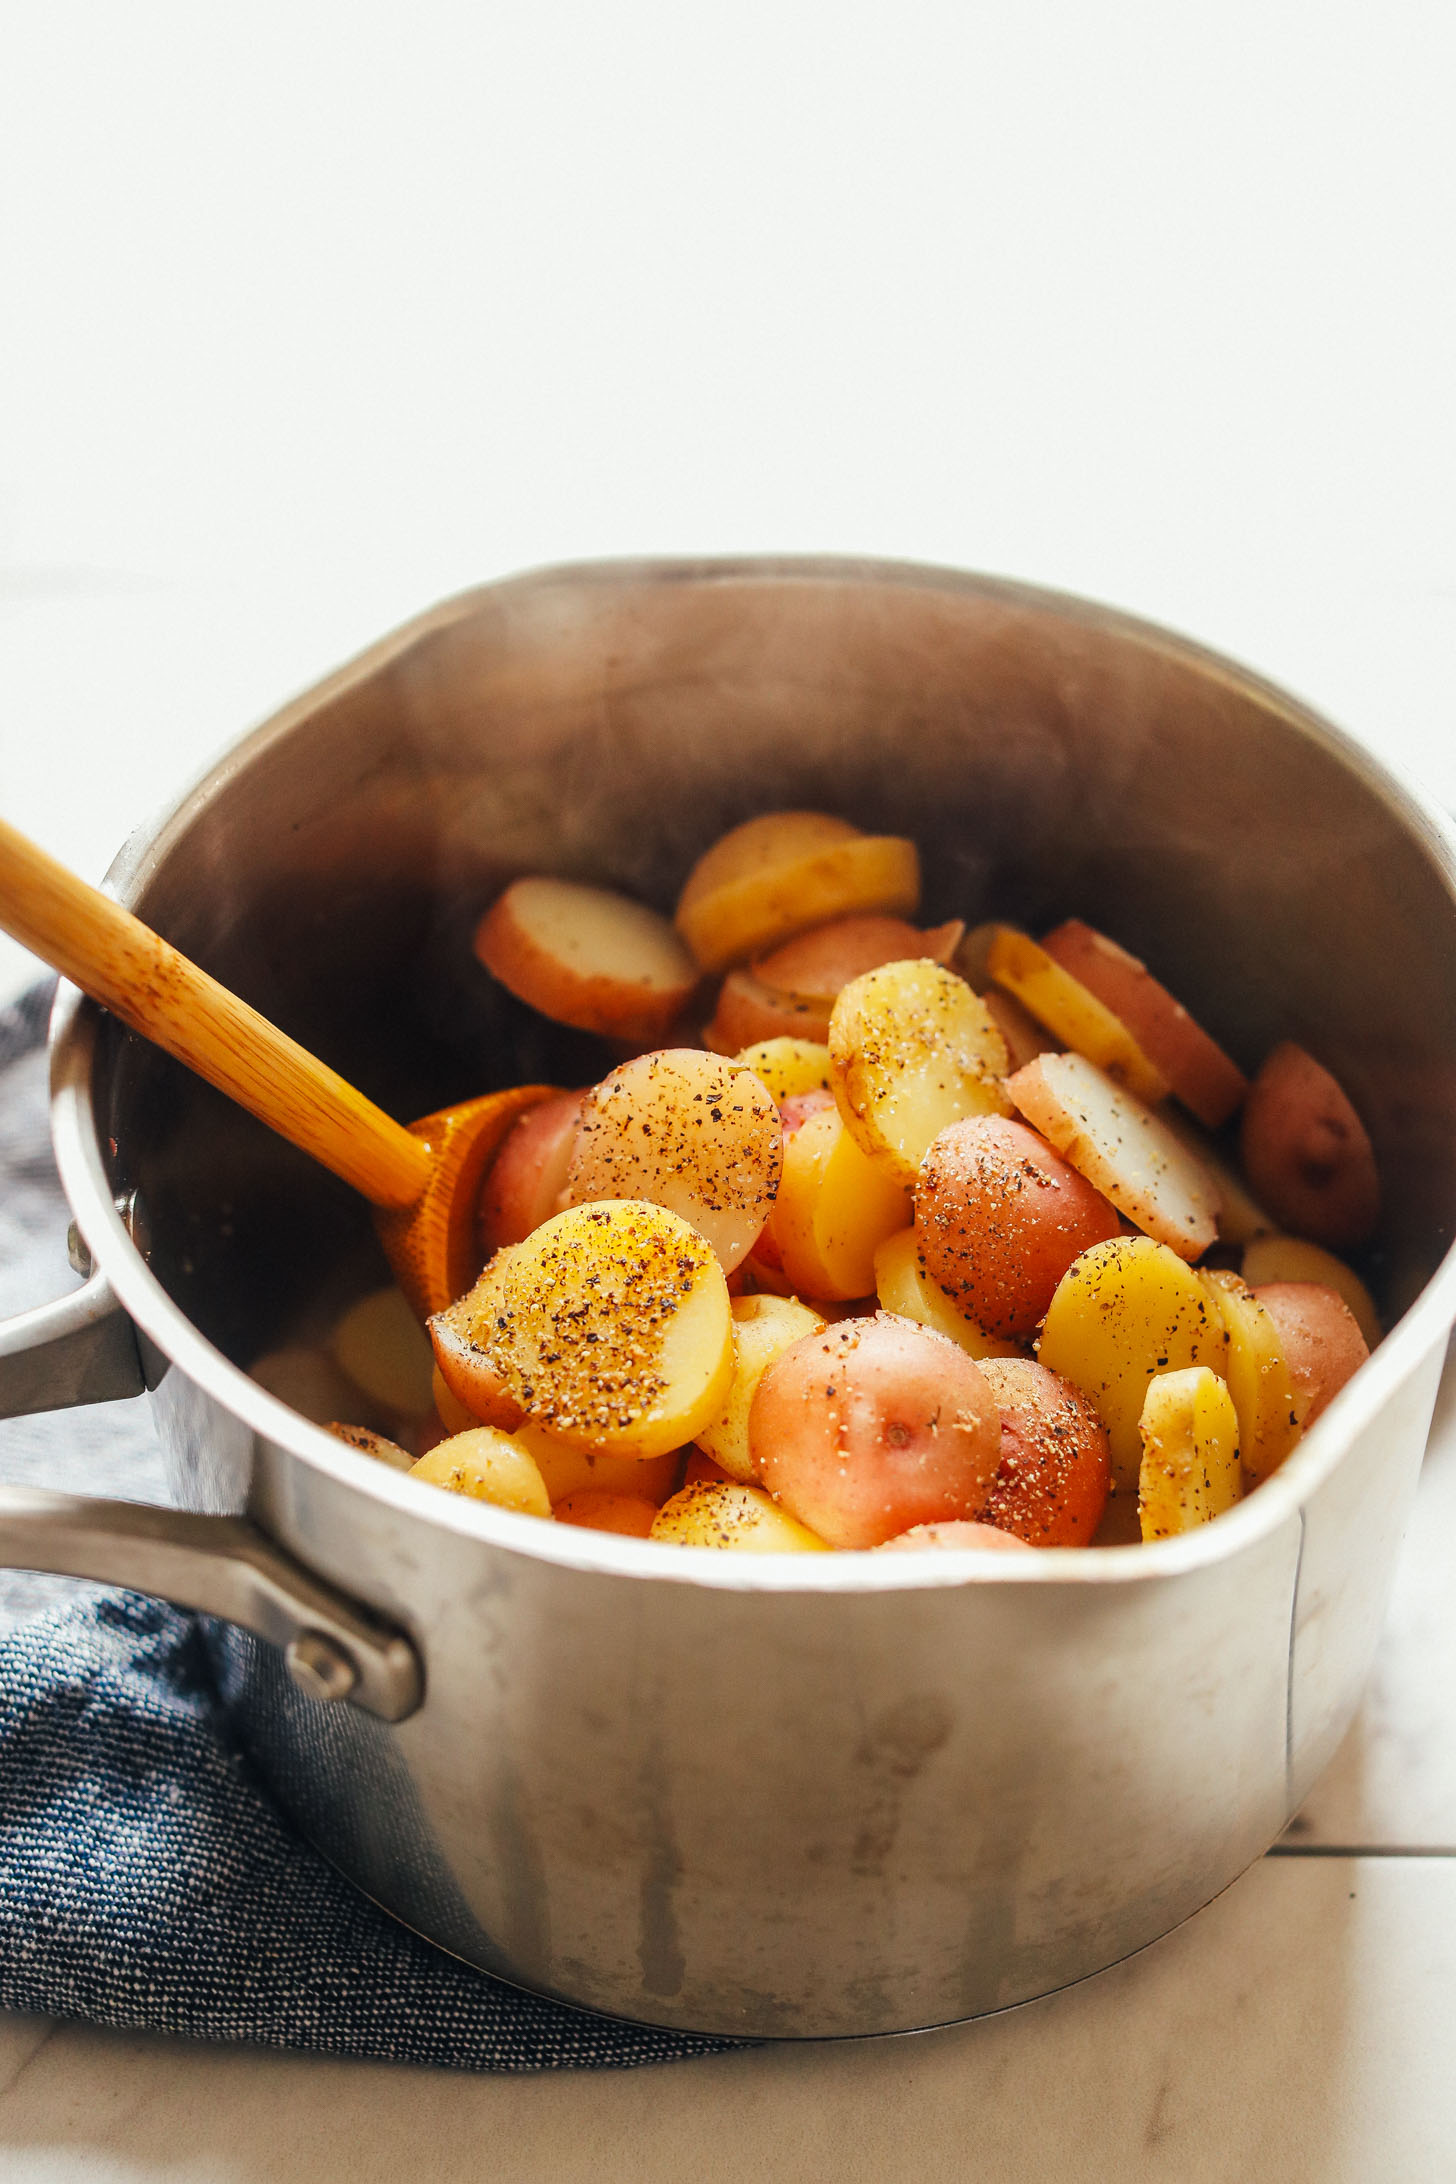 Saucepan filled with freshly cooked potatoes for homemade potato salad